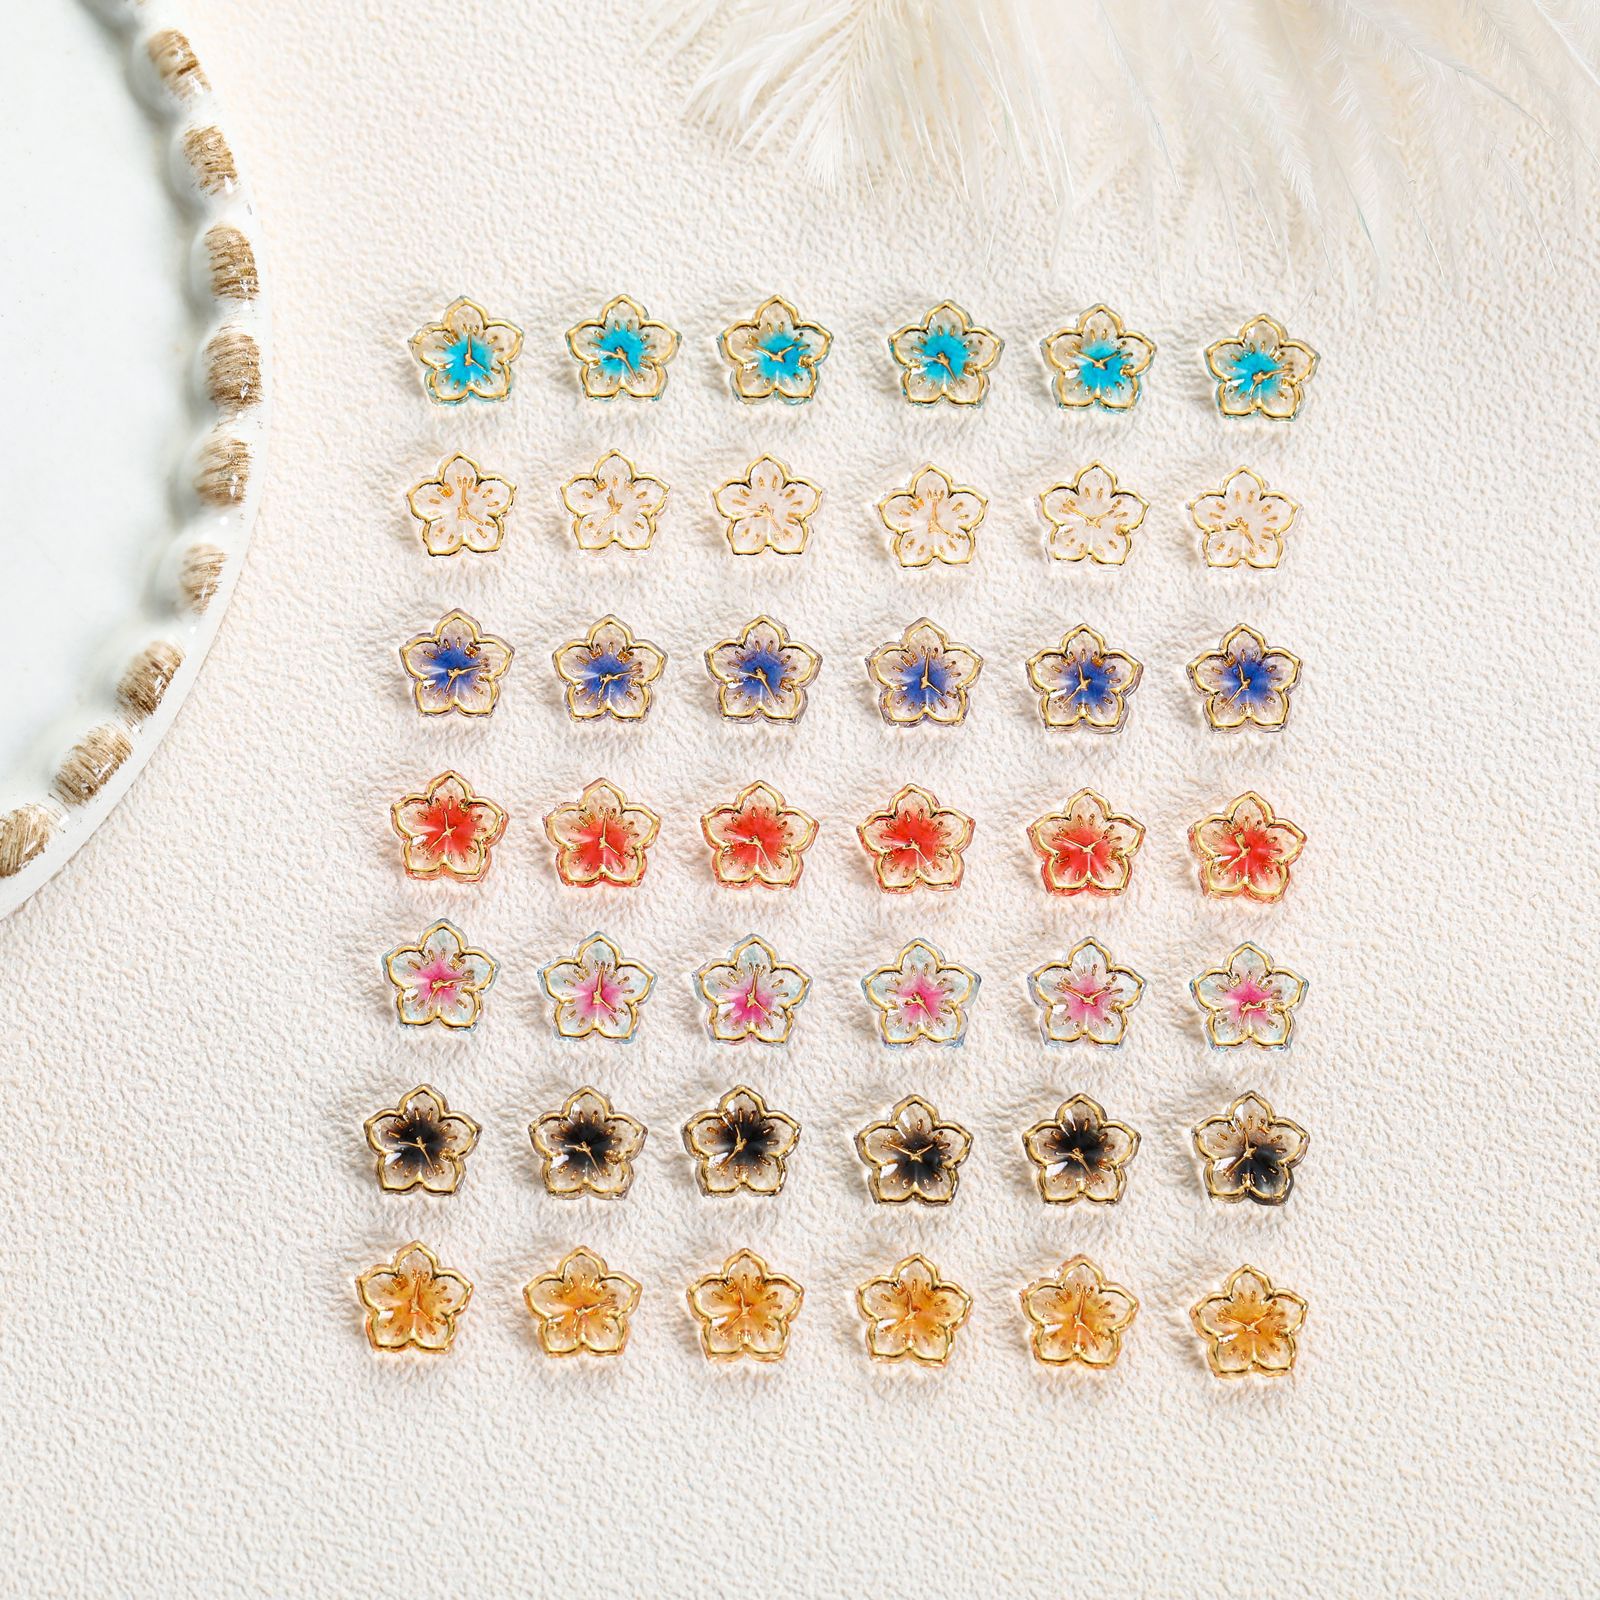 Dornail 30PCS Acrylic Flower Nail Charms,3D Gold Edge Flower Resin Charms  for Nails Mixed Colorful Flower Petals Nail Art Charms Floral Nail Charm  DIY